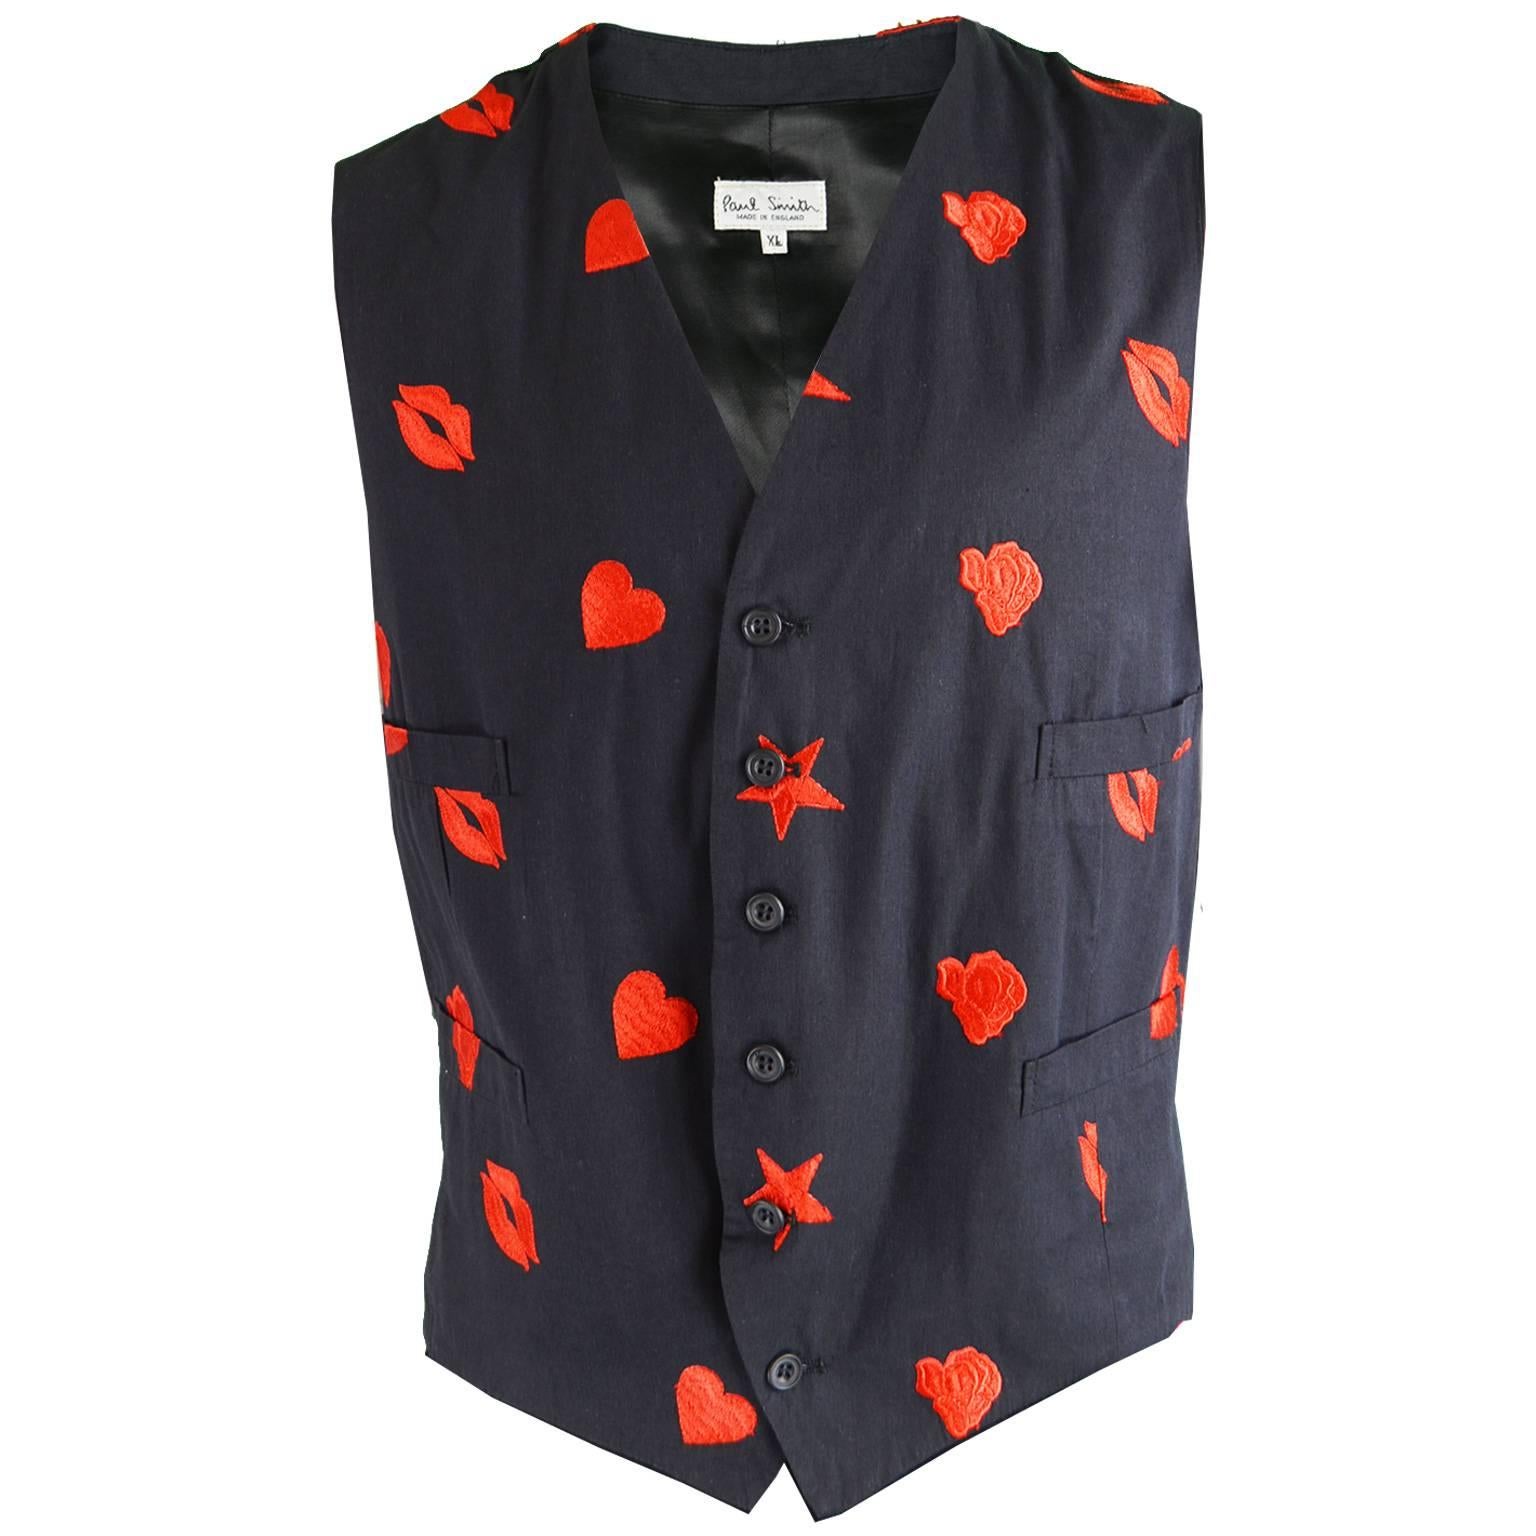 Paul Smith Men's Vintage Black & Red Embroidered Waistcoat, 1990s